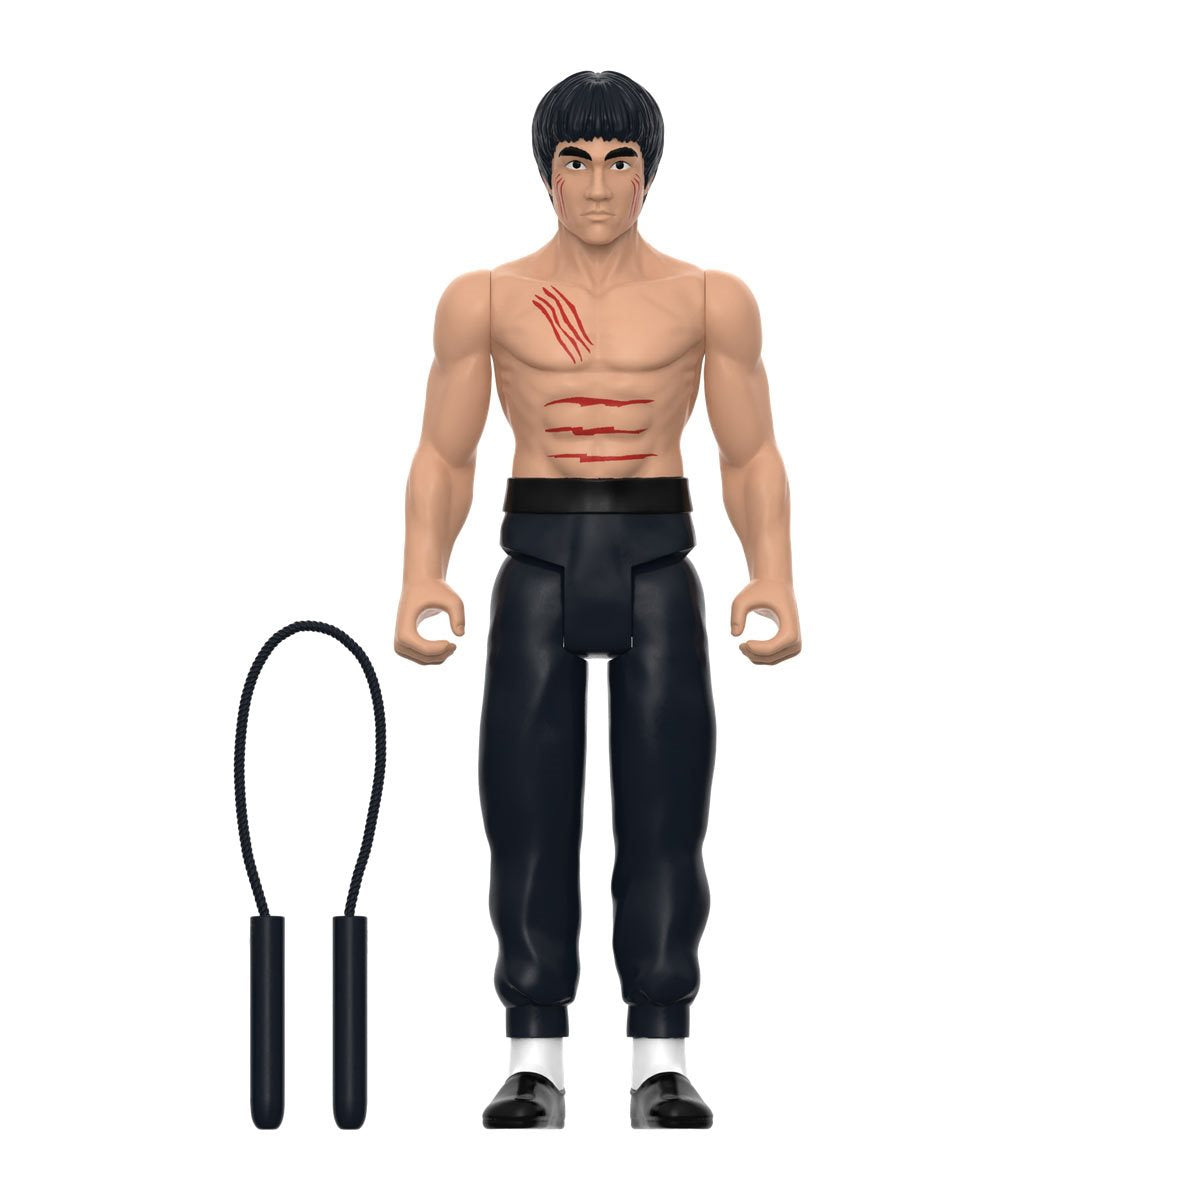 Bruce Lee ReAction Figure - Bruce Lee as "The Warrior"